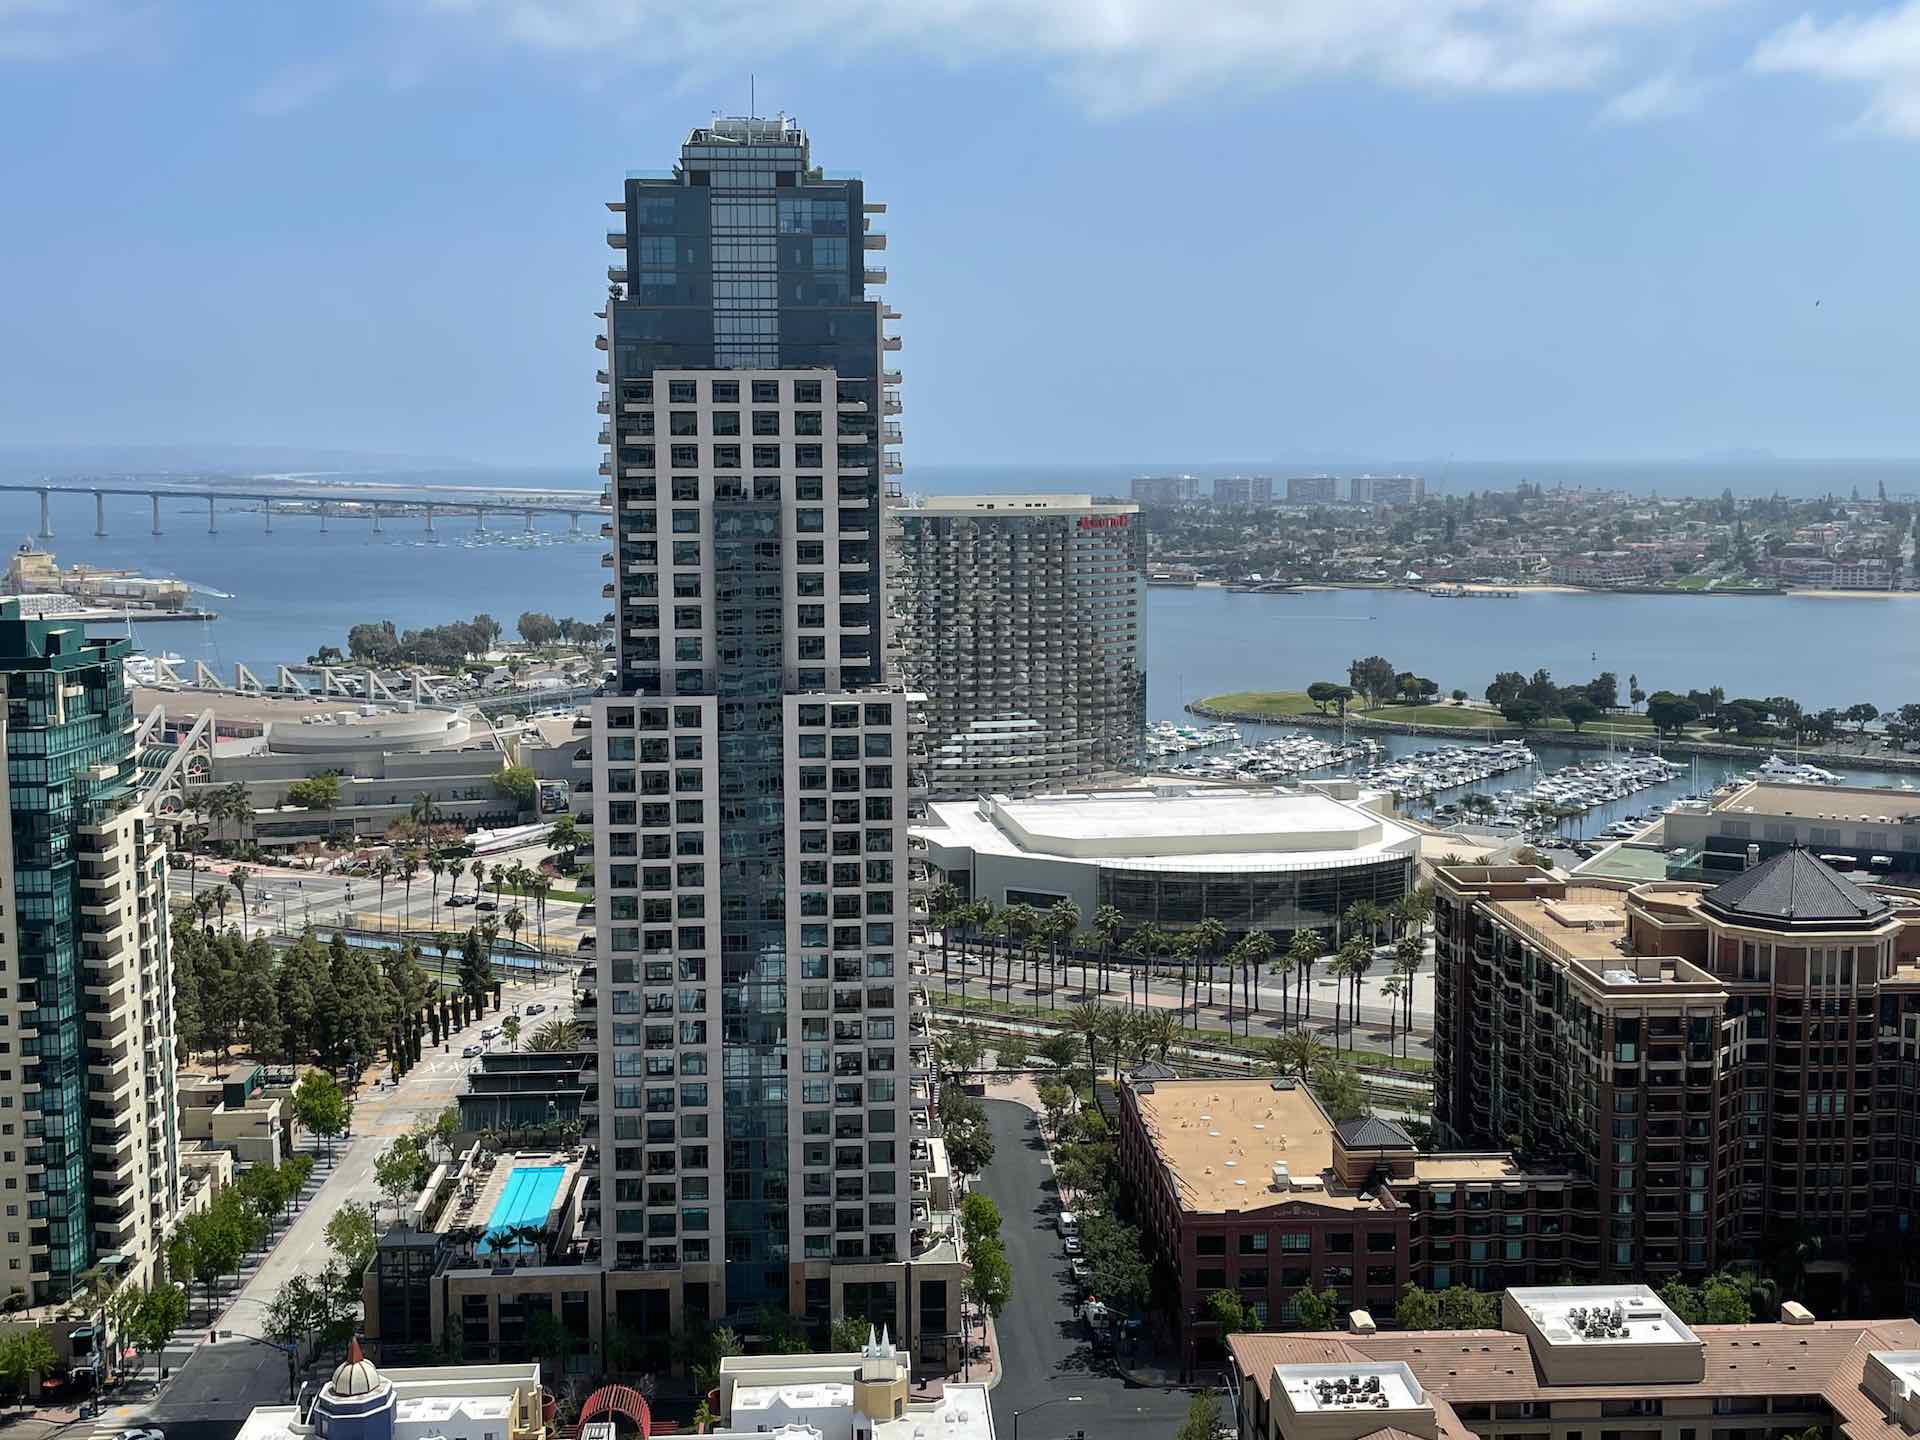 The Pinnacle luxury condo tower in Marina District San Diego